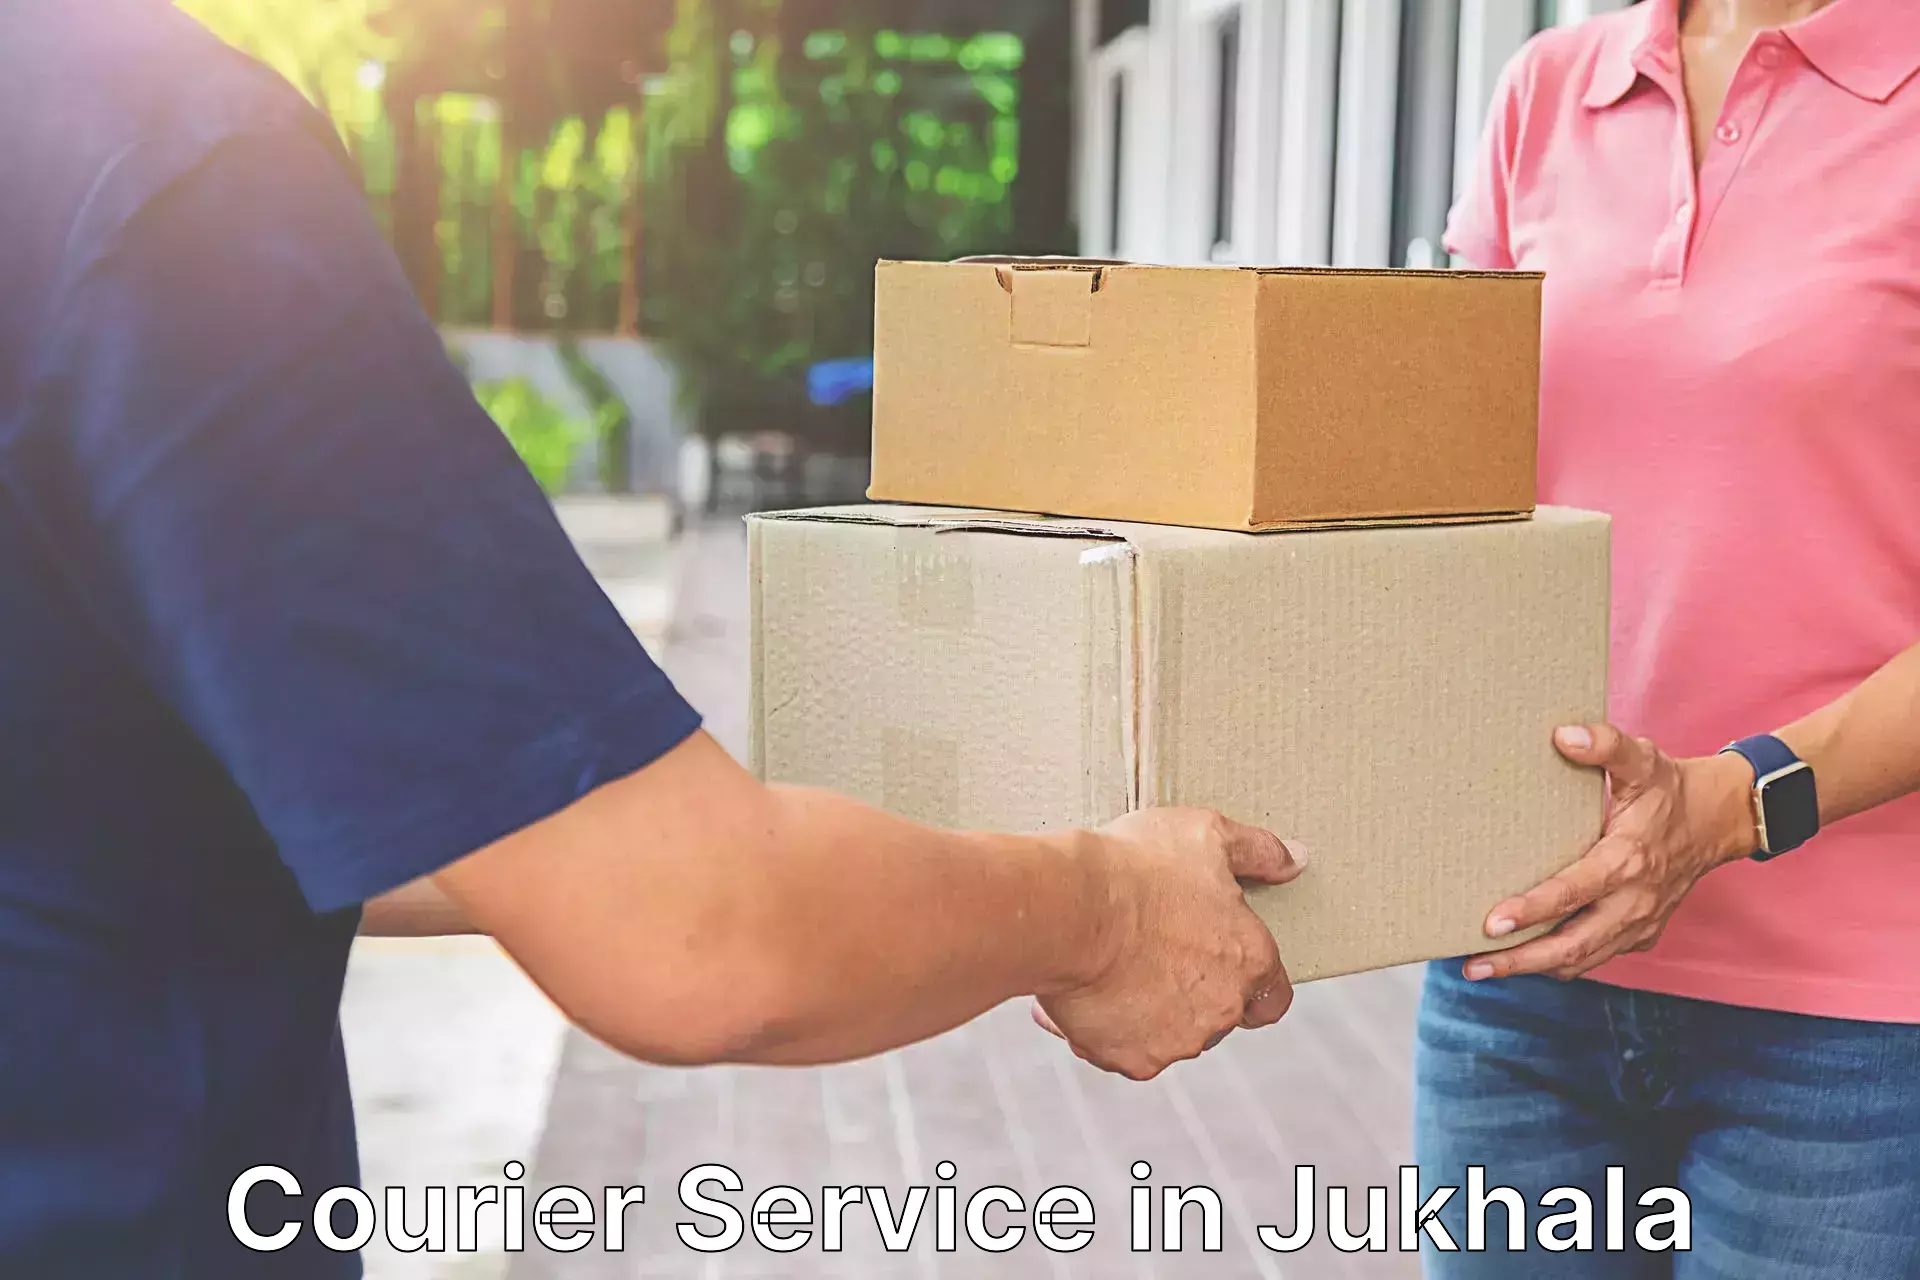 Advanced delivery network in Jukhala